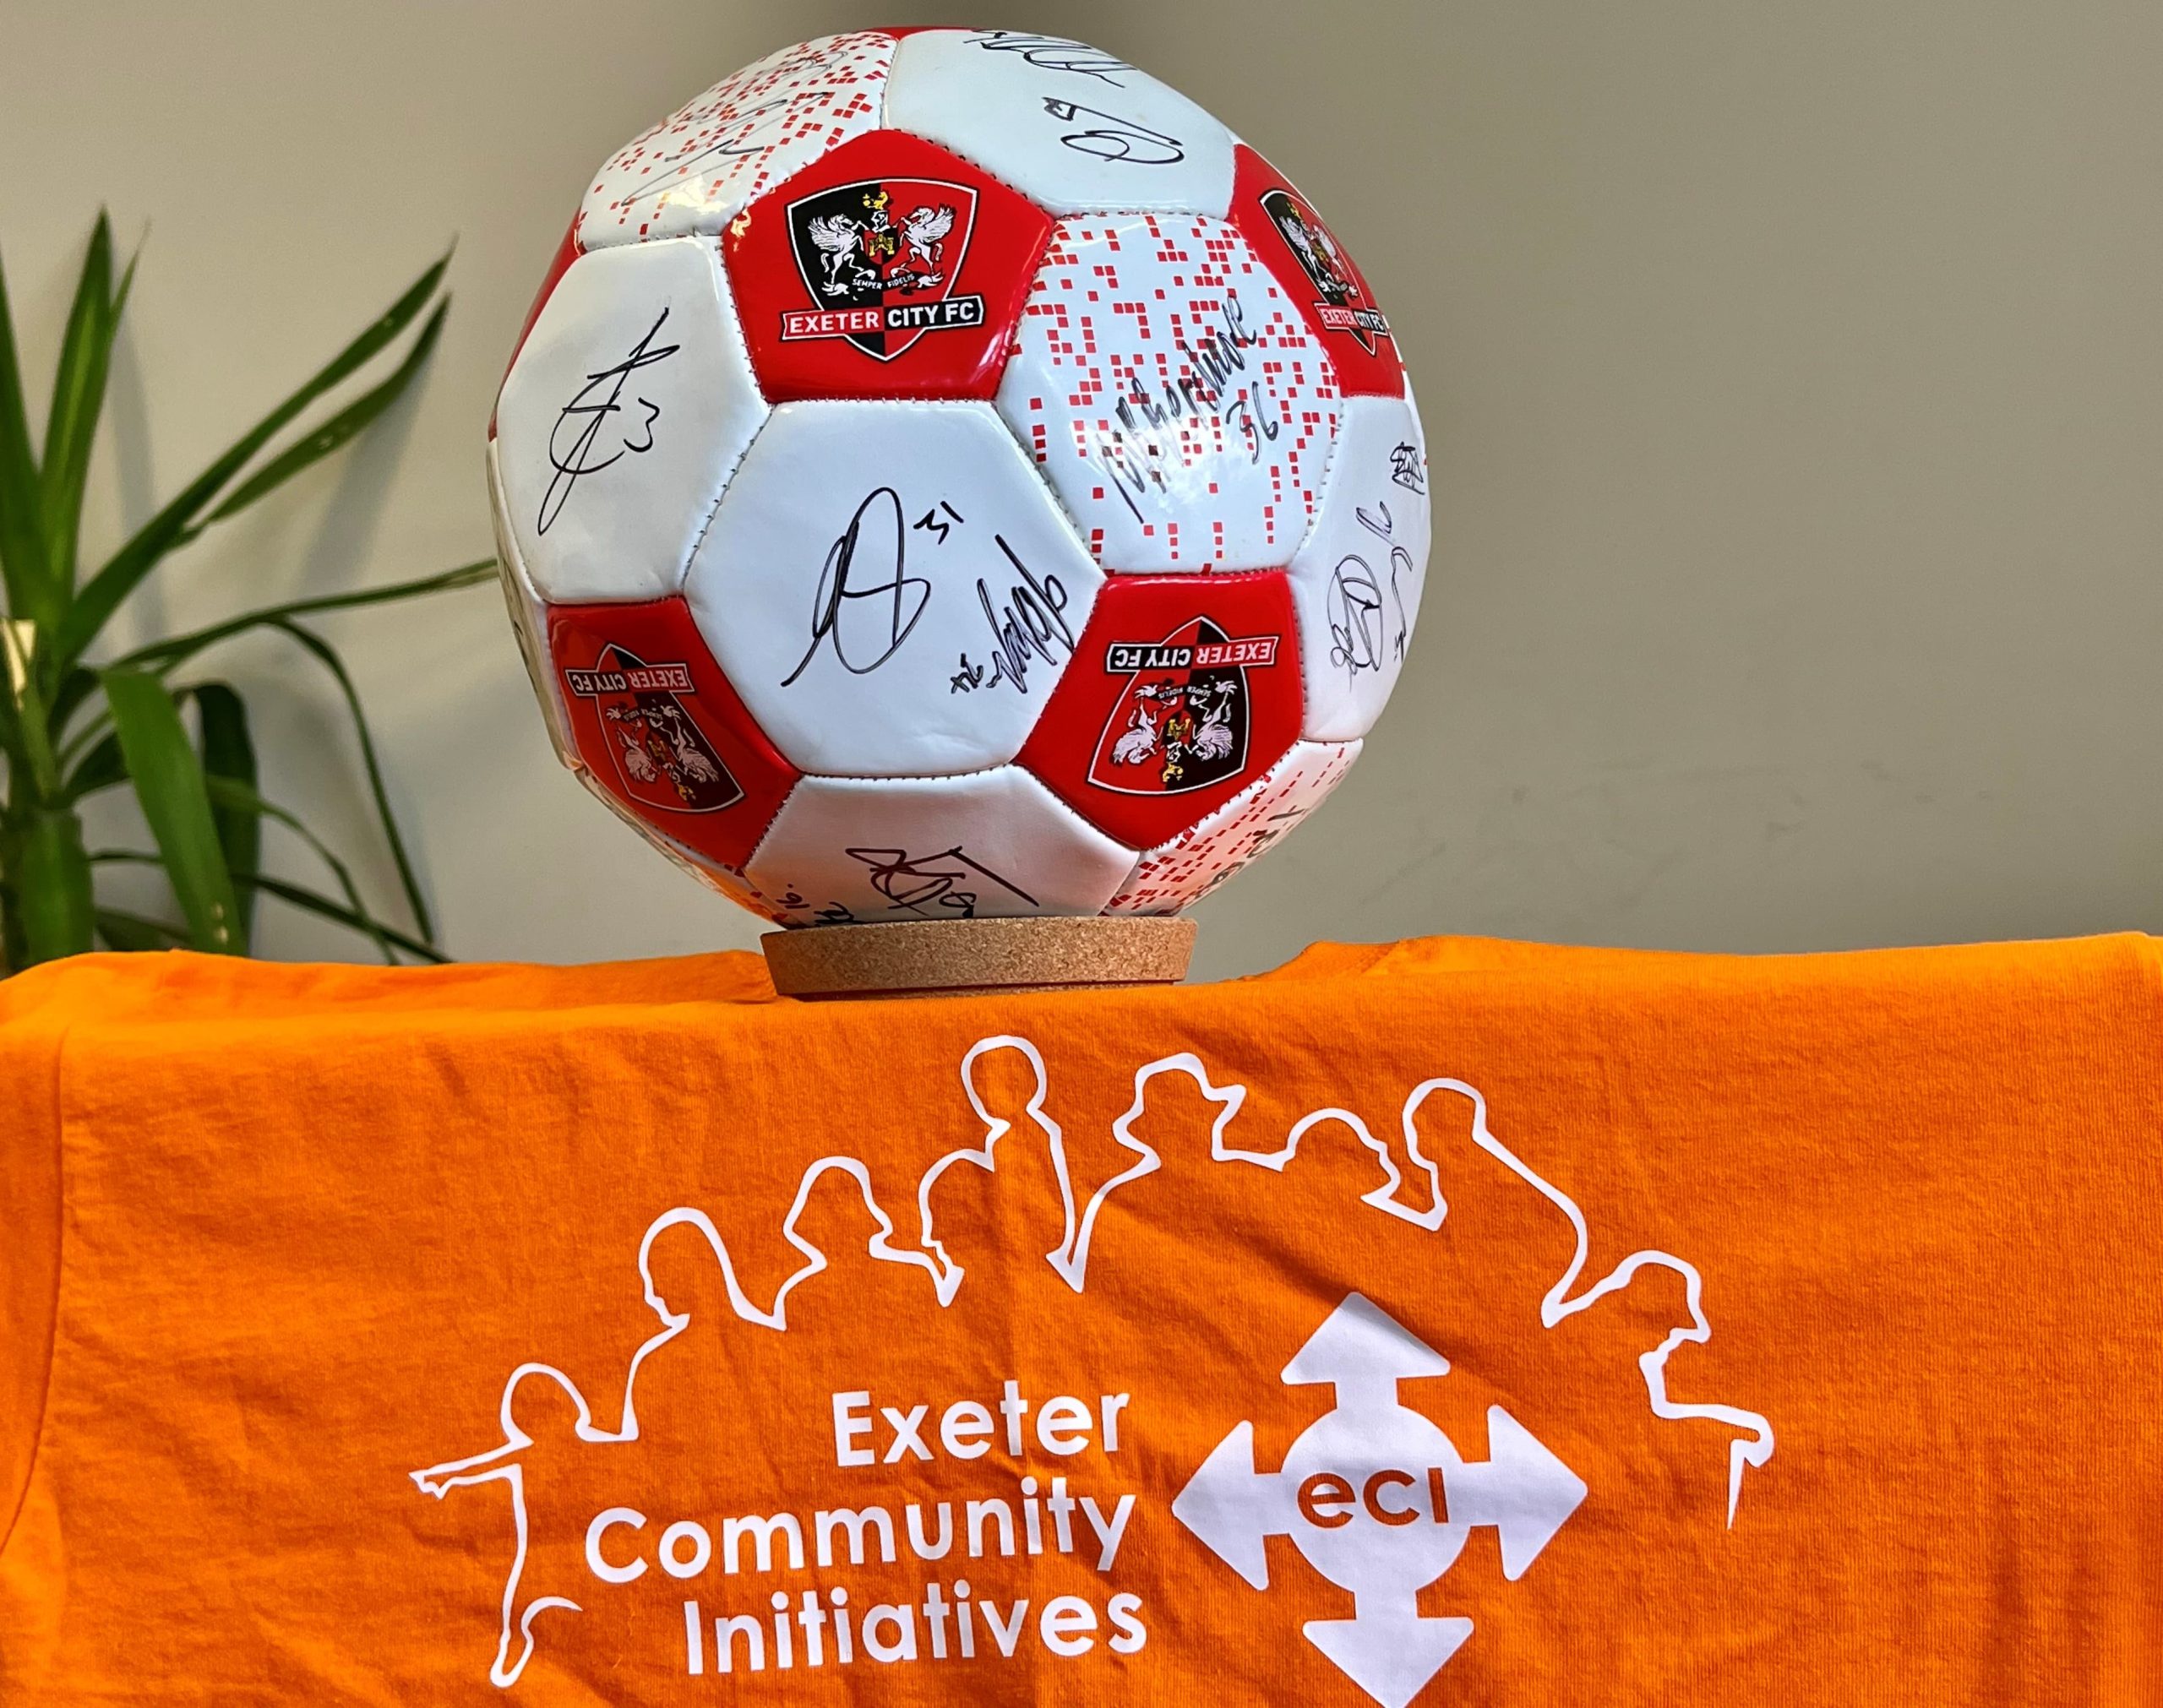 Exeter Community Initiatives launches competition to find best goal celebration!